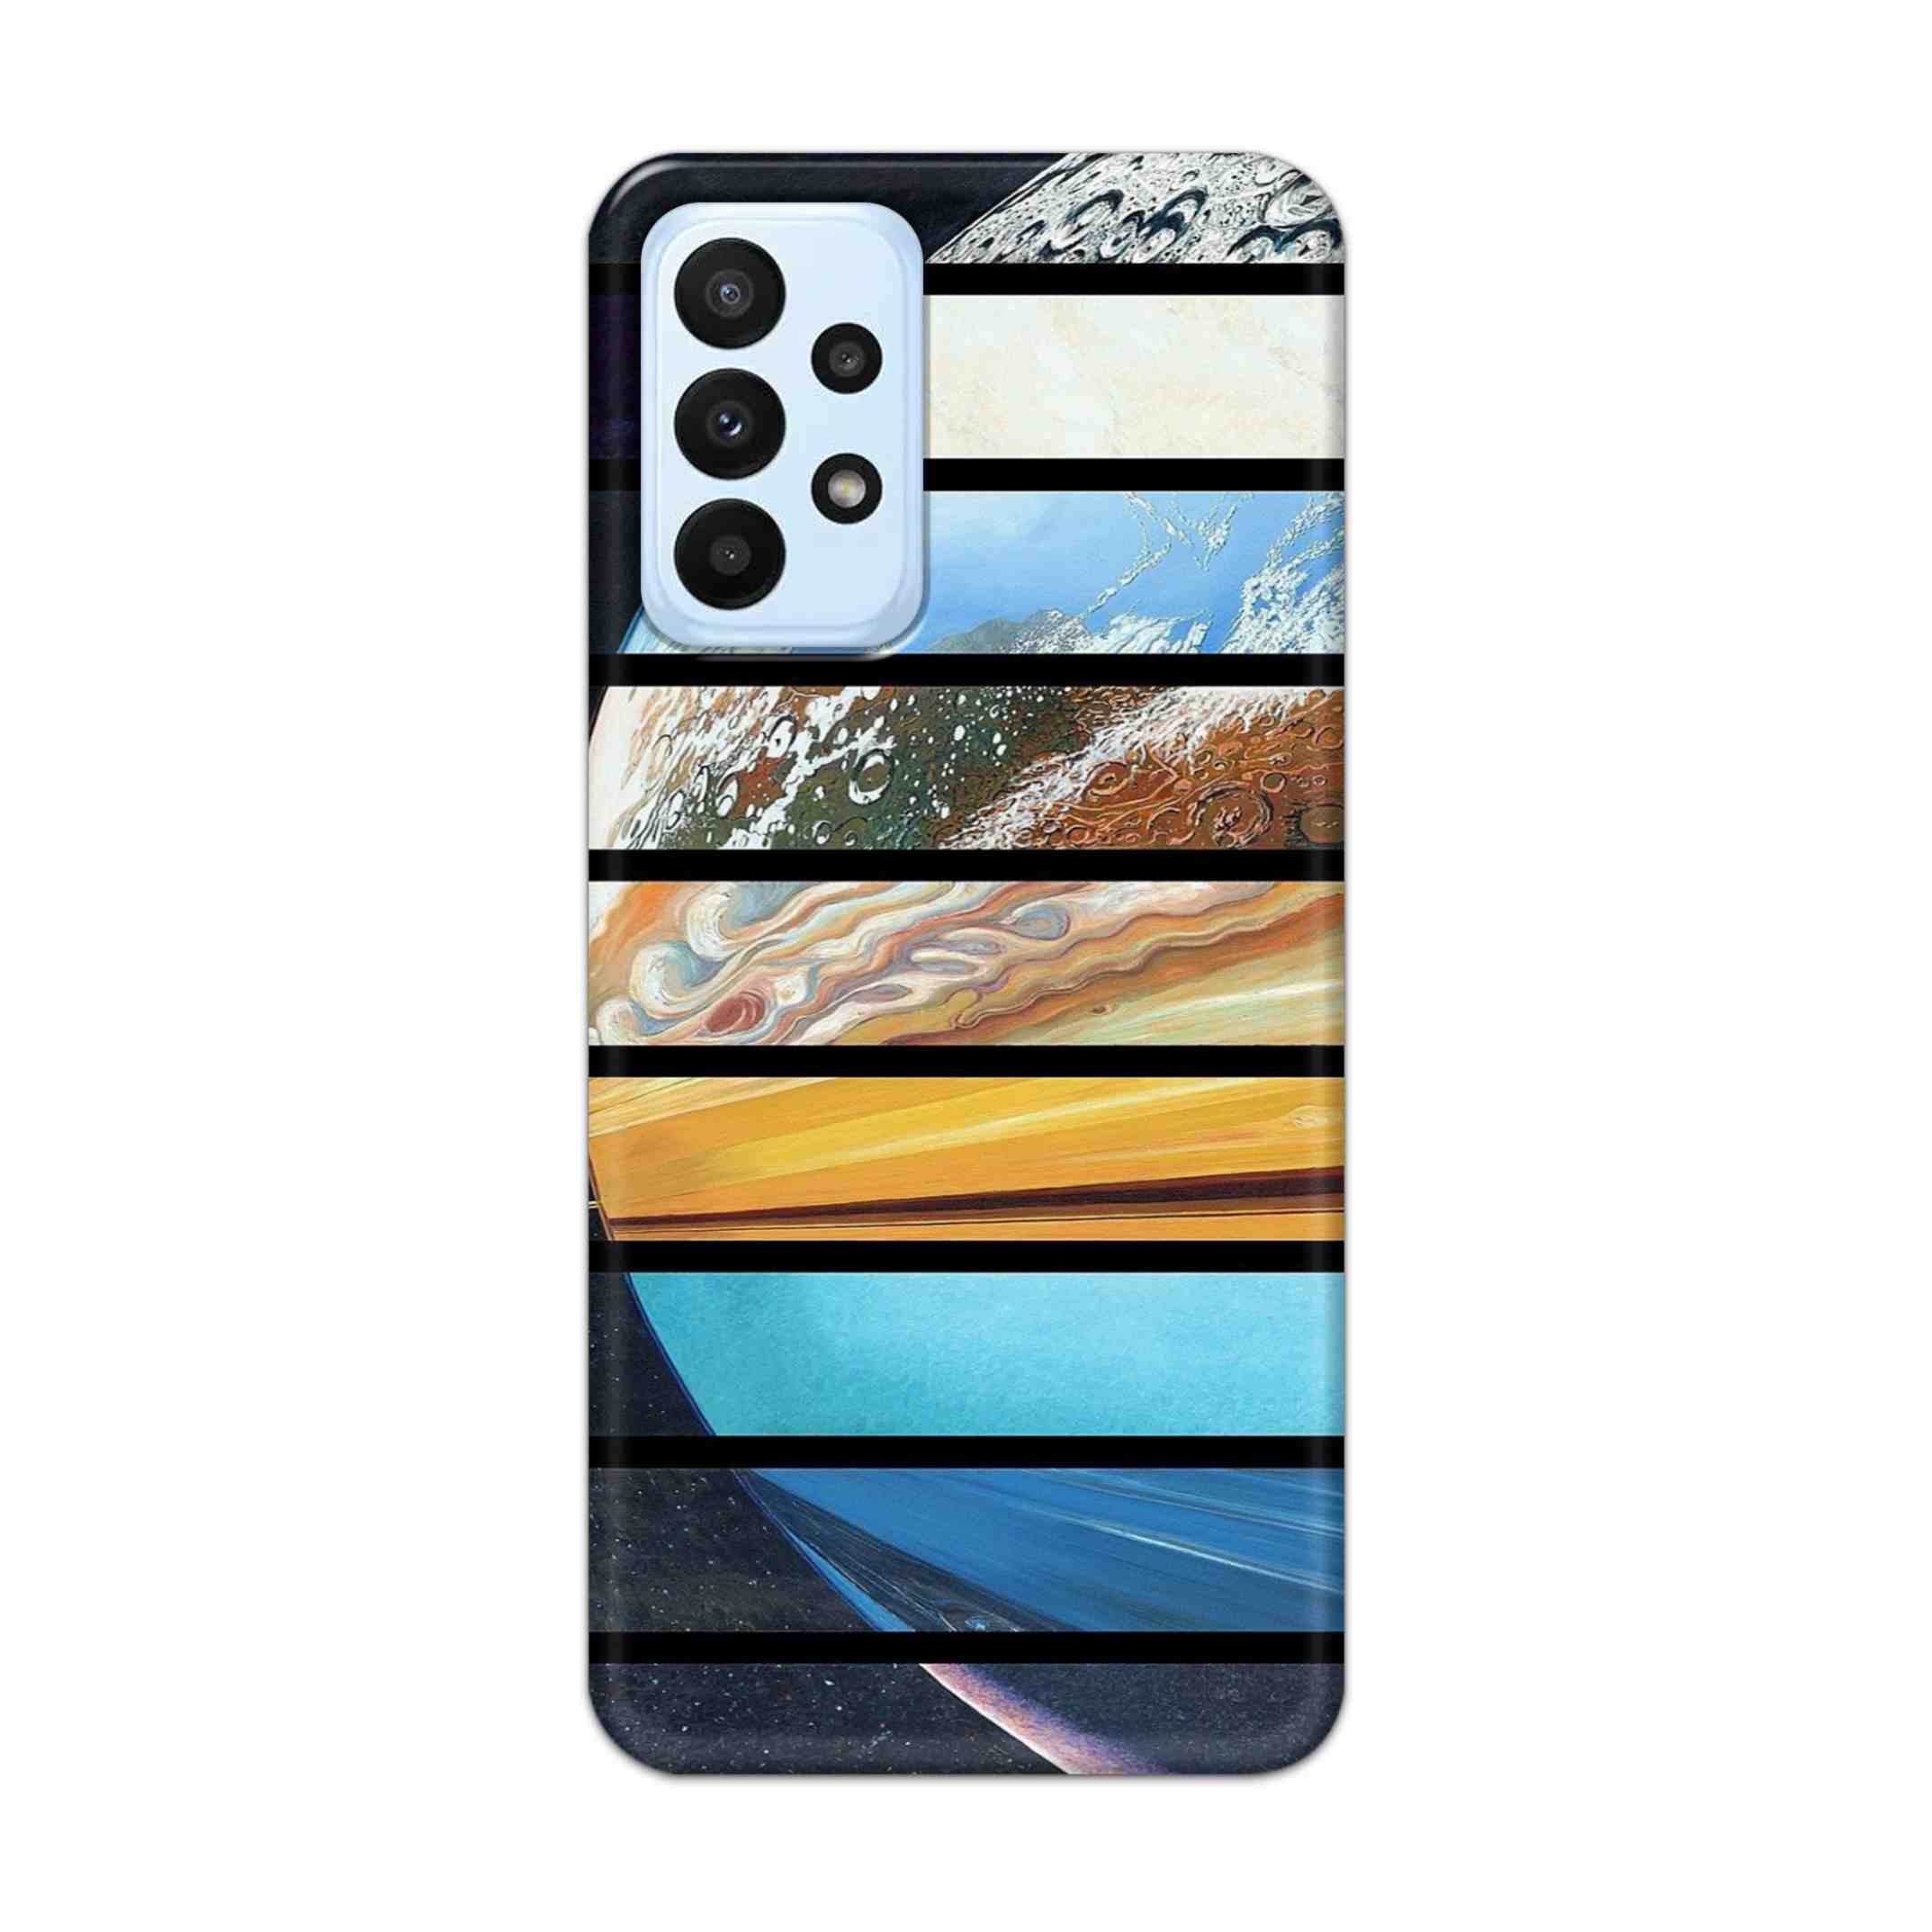 Buy Colourful Earth Hard Back Mobile Phone Case Cover For Samsung A23 Online